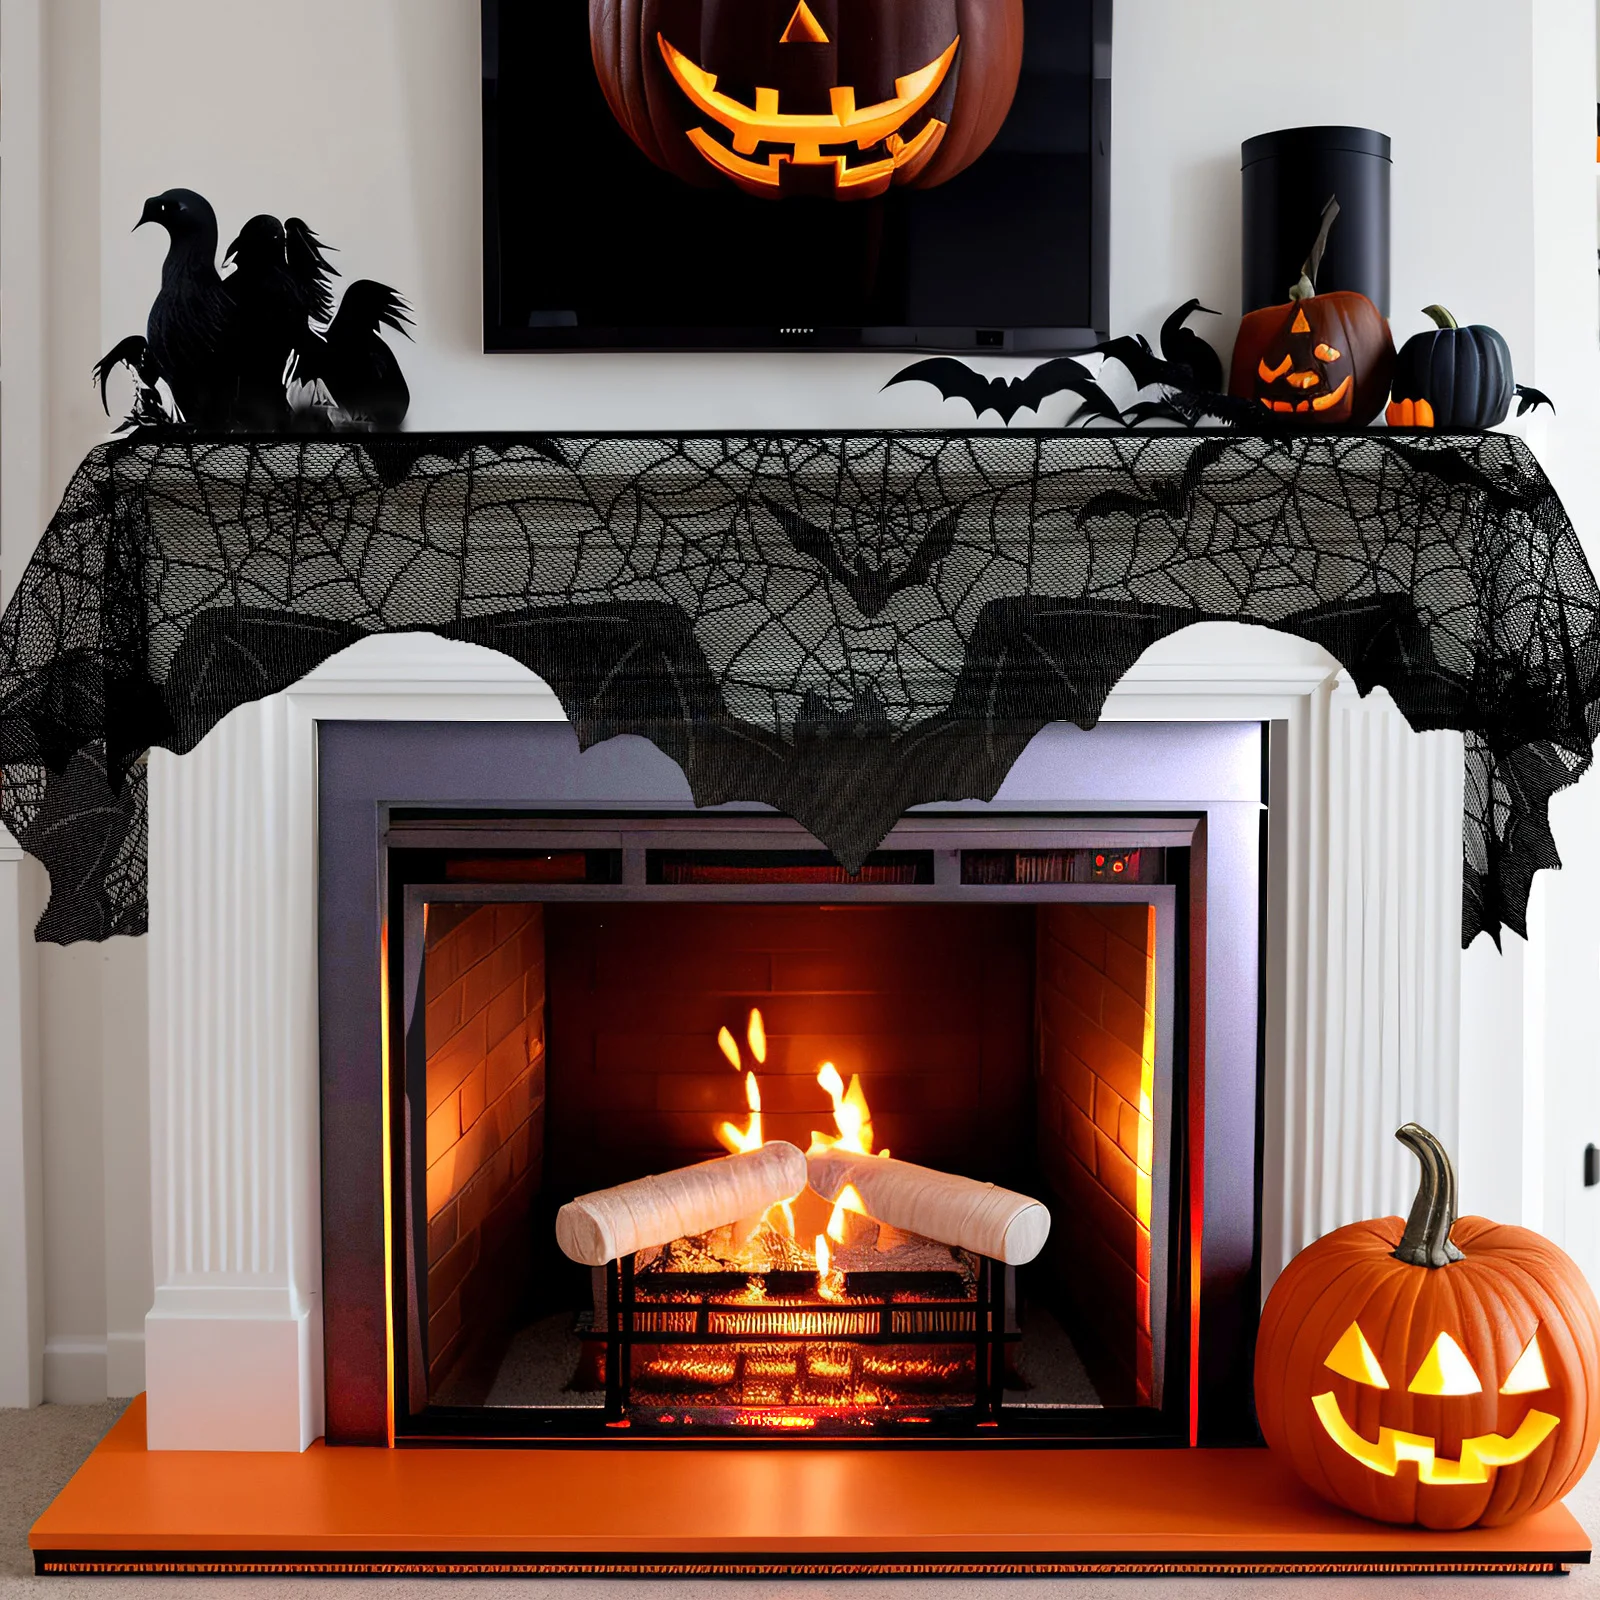 

Ourwarm Halloween Decorative Bats Curtains Lace Spider Web Holiday Stove Towel Lampshade Fireplace Halloween Party Decoration